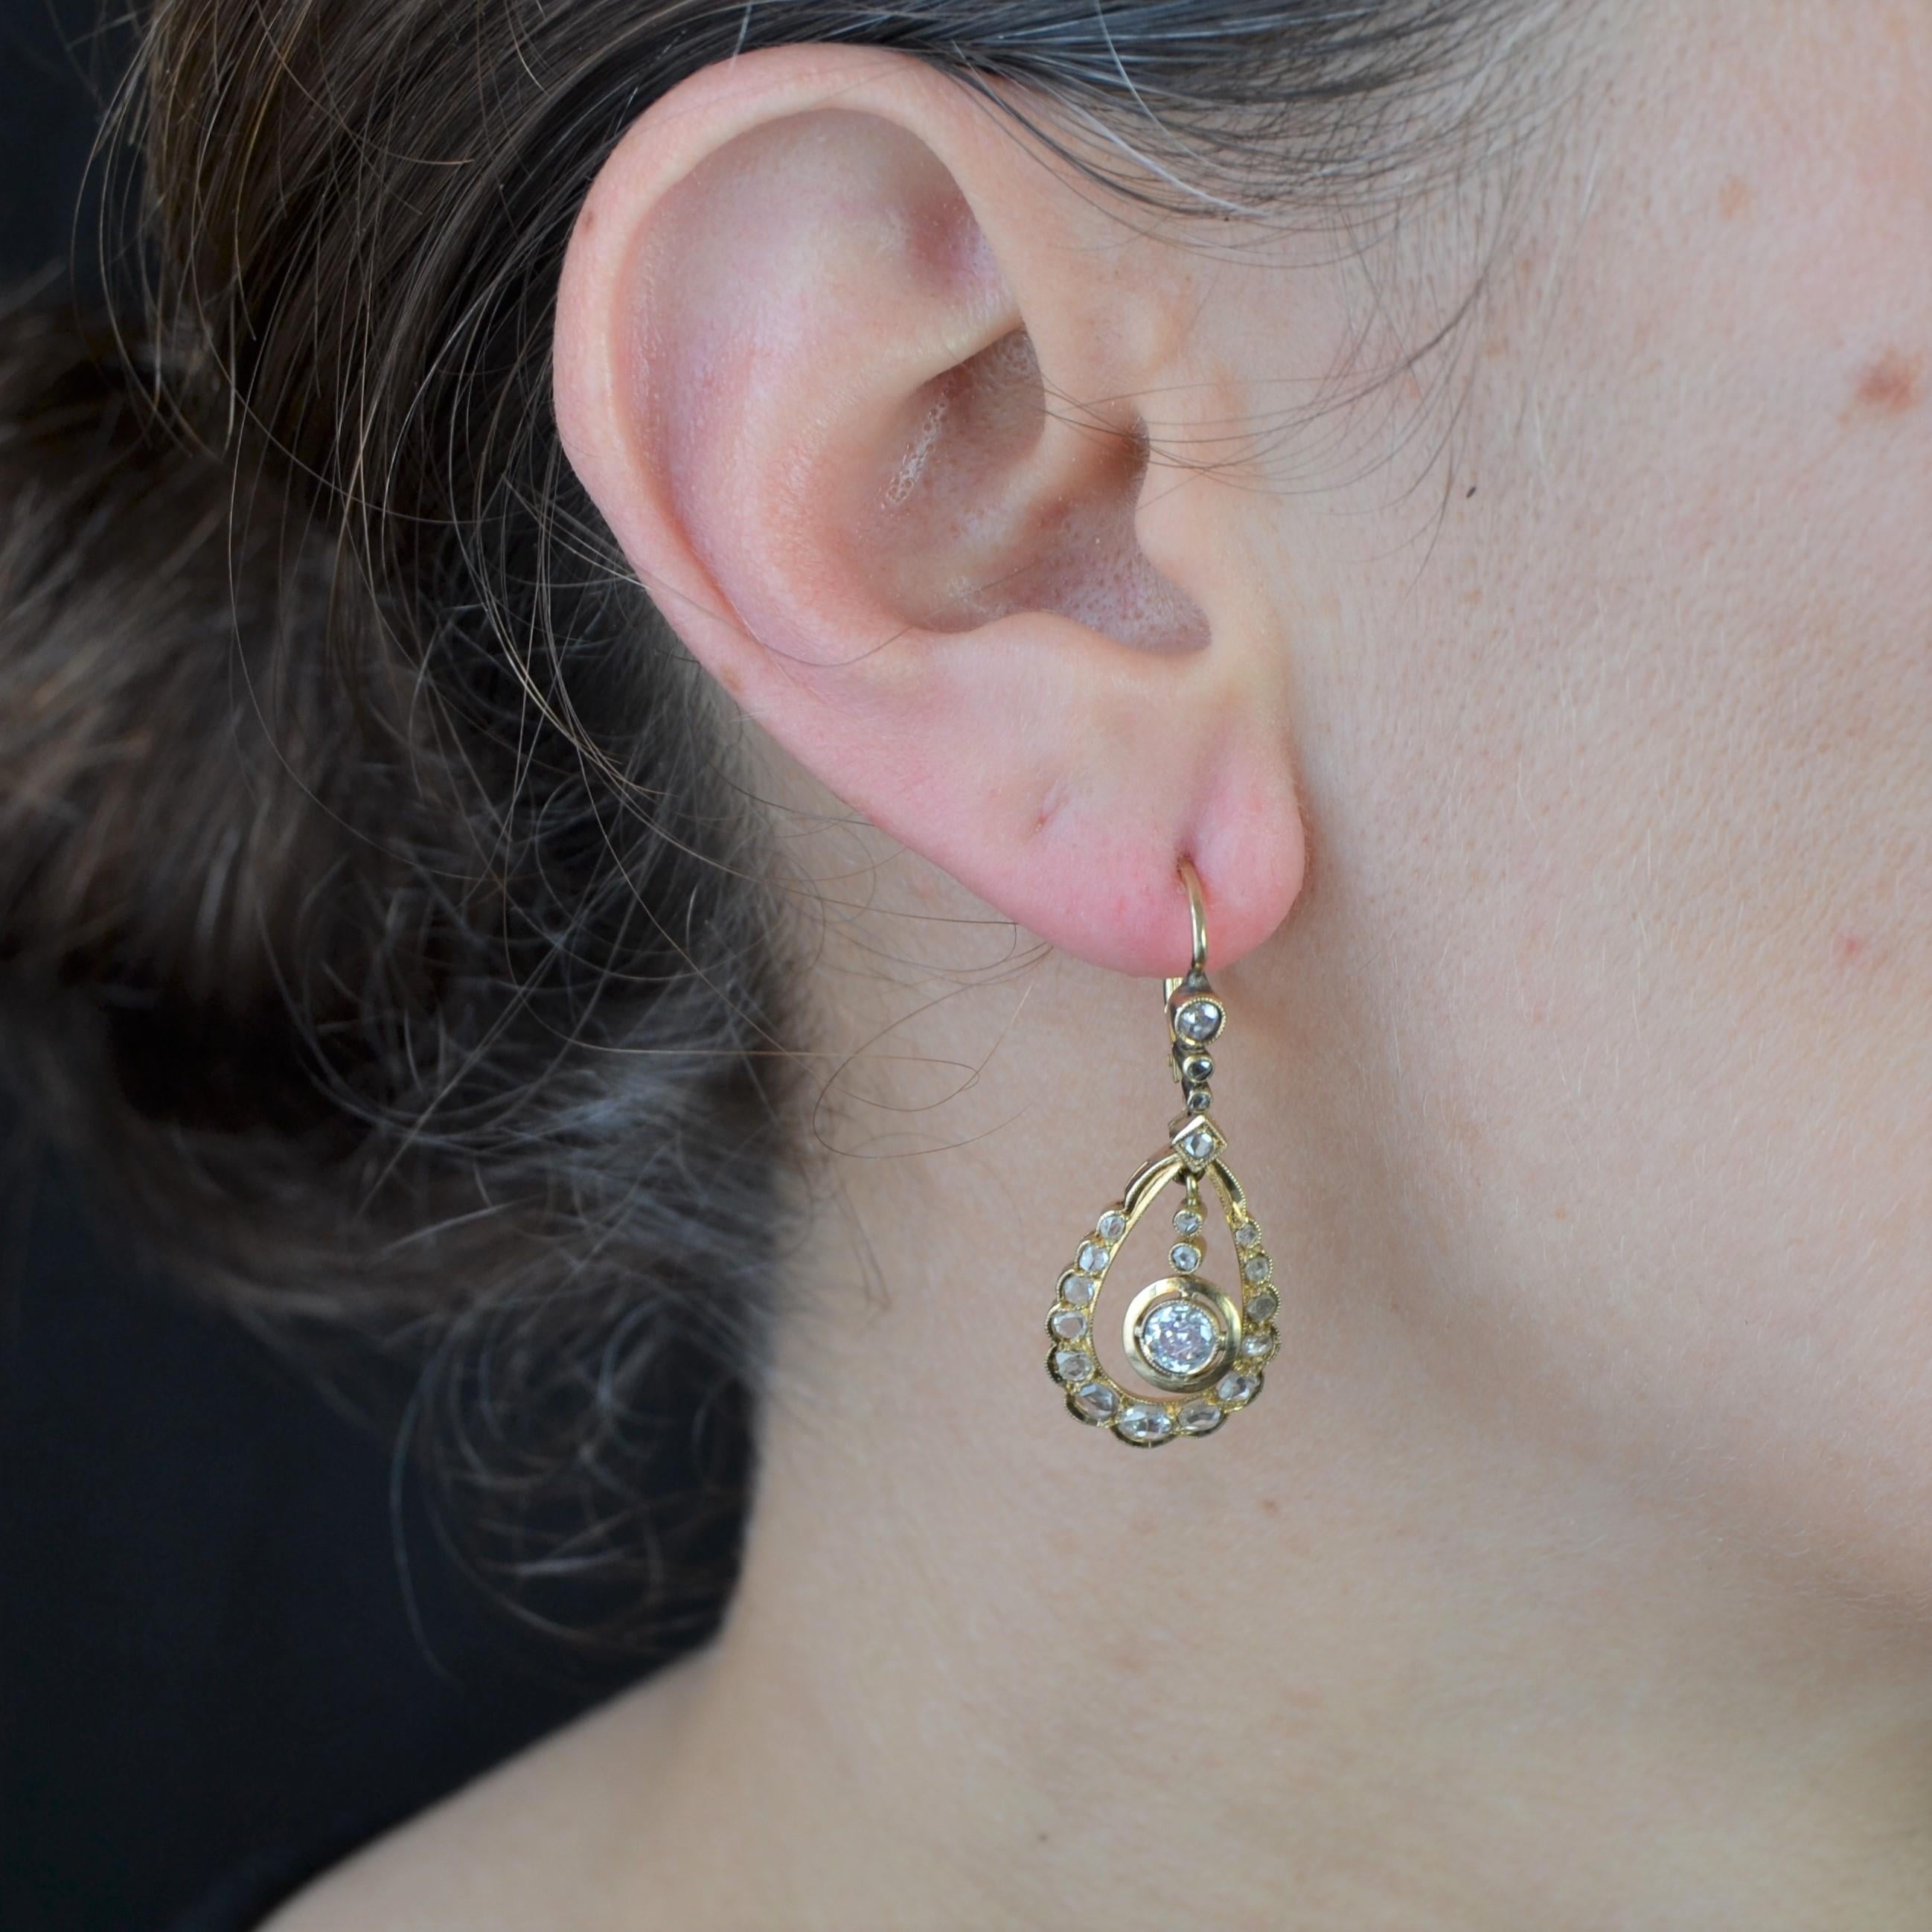 For pierced ears.
Earrings in 18 karat yellow gold, owl hallmark.
Each pendant has three rose- cut diamonds in fall, which holds in pampille a drop openwork the polylobed edges set with rose- cut diamonds. In the center, two diamonds support an